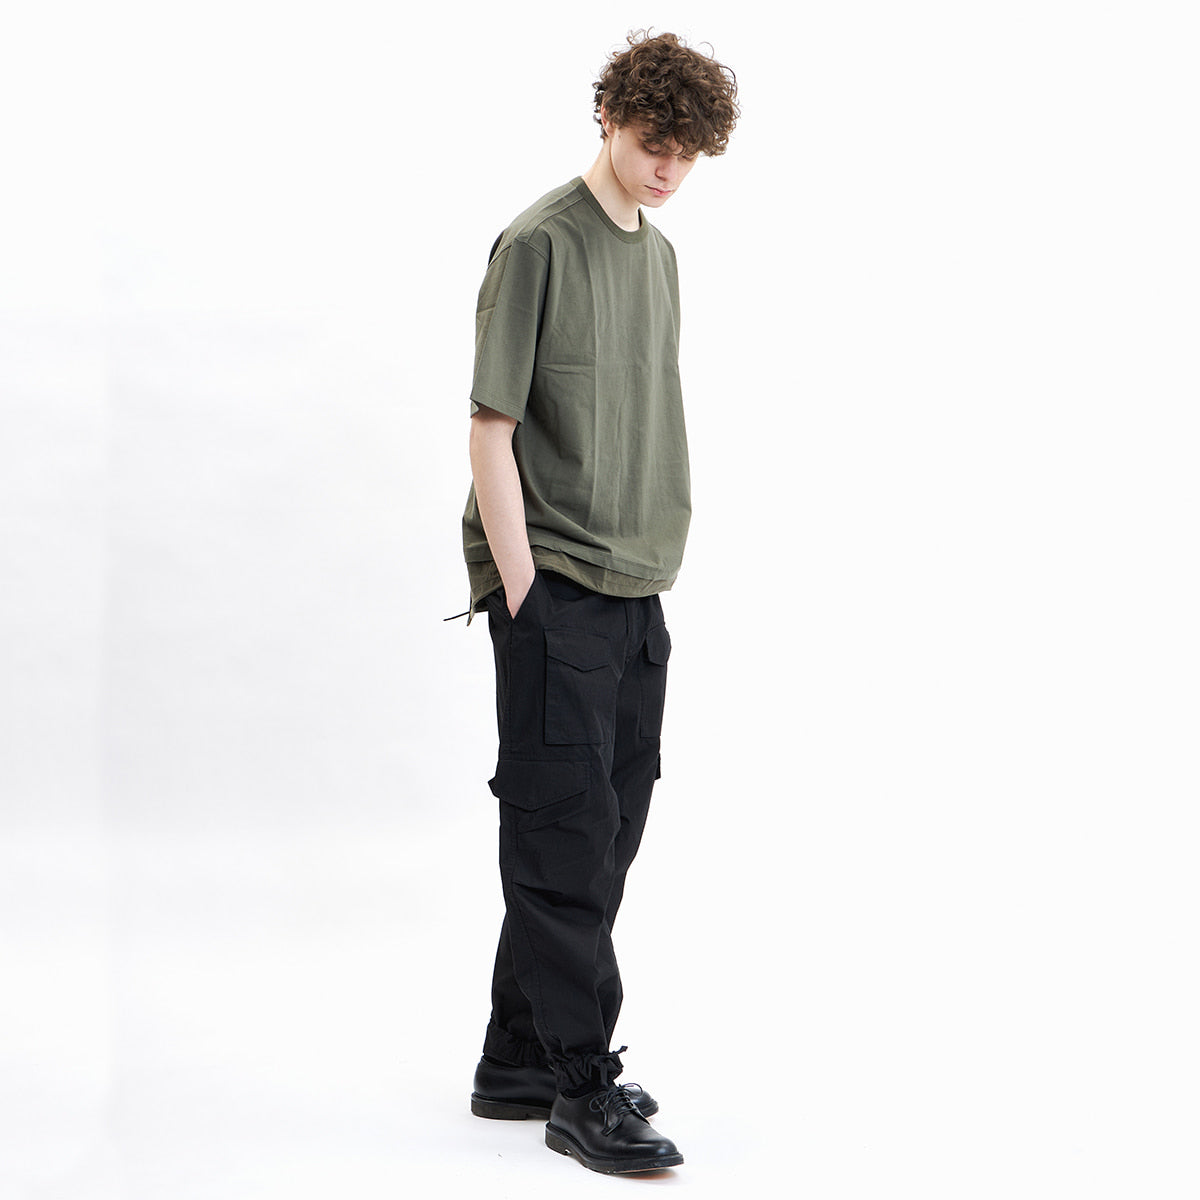 EASTLOGUE 2021SSCS03 FISHTAIL T-SHIRT - OLIVE